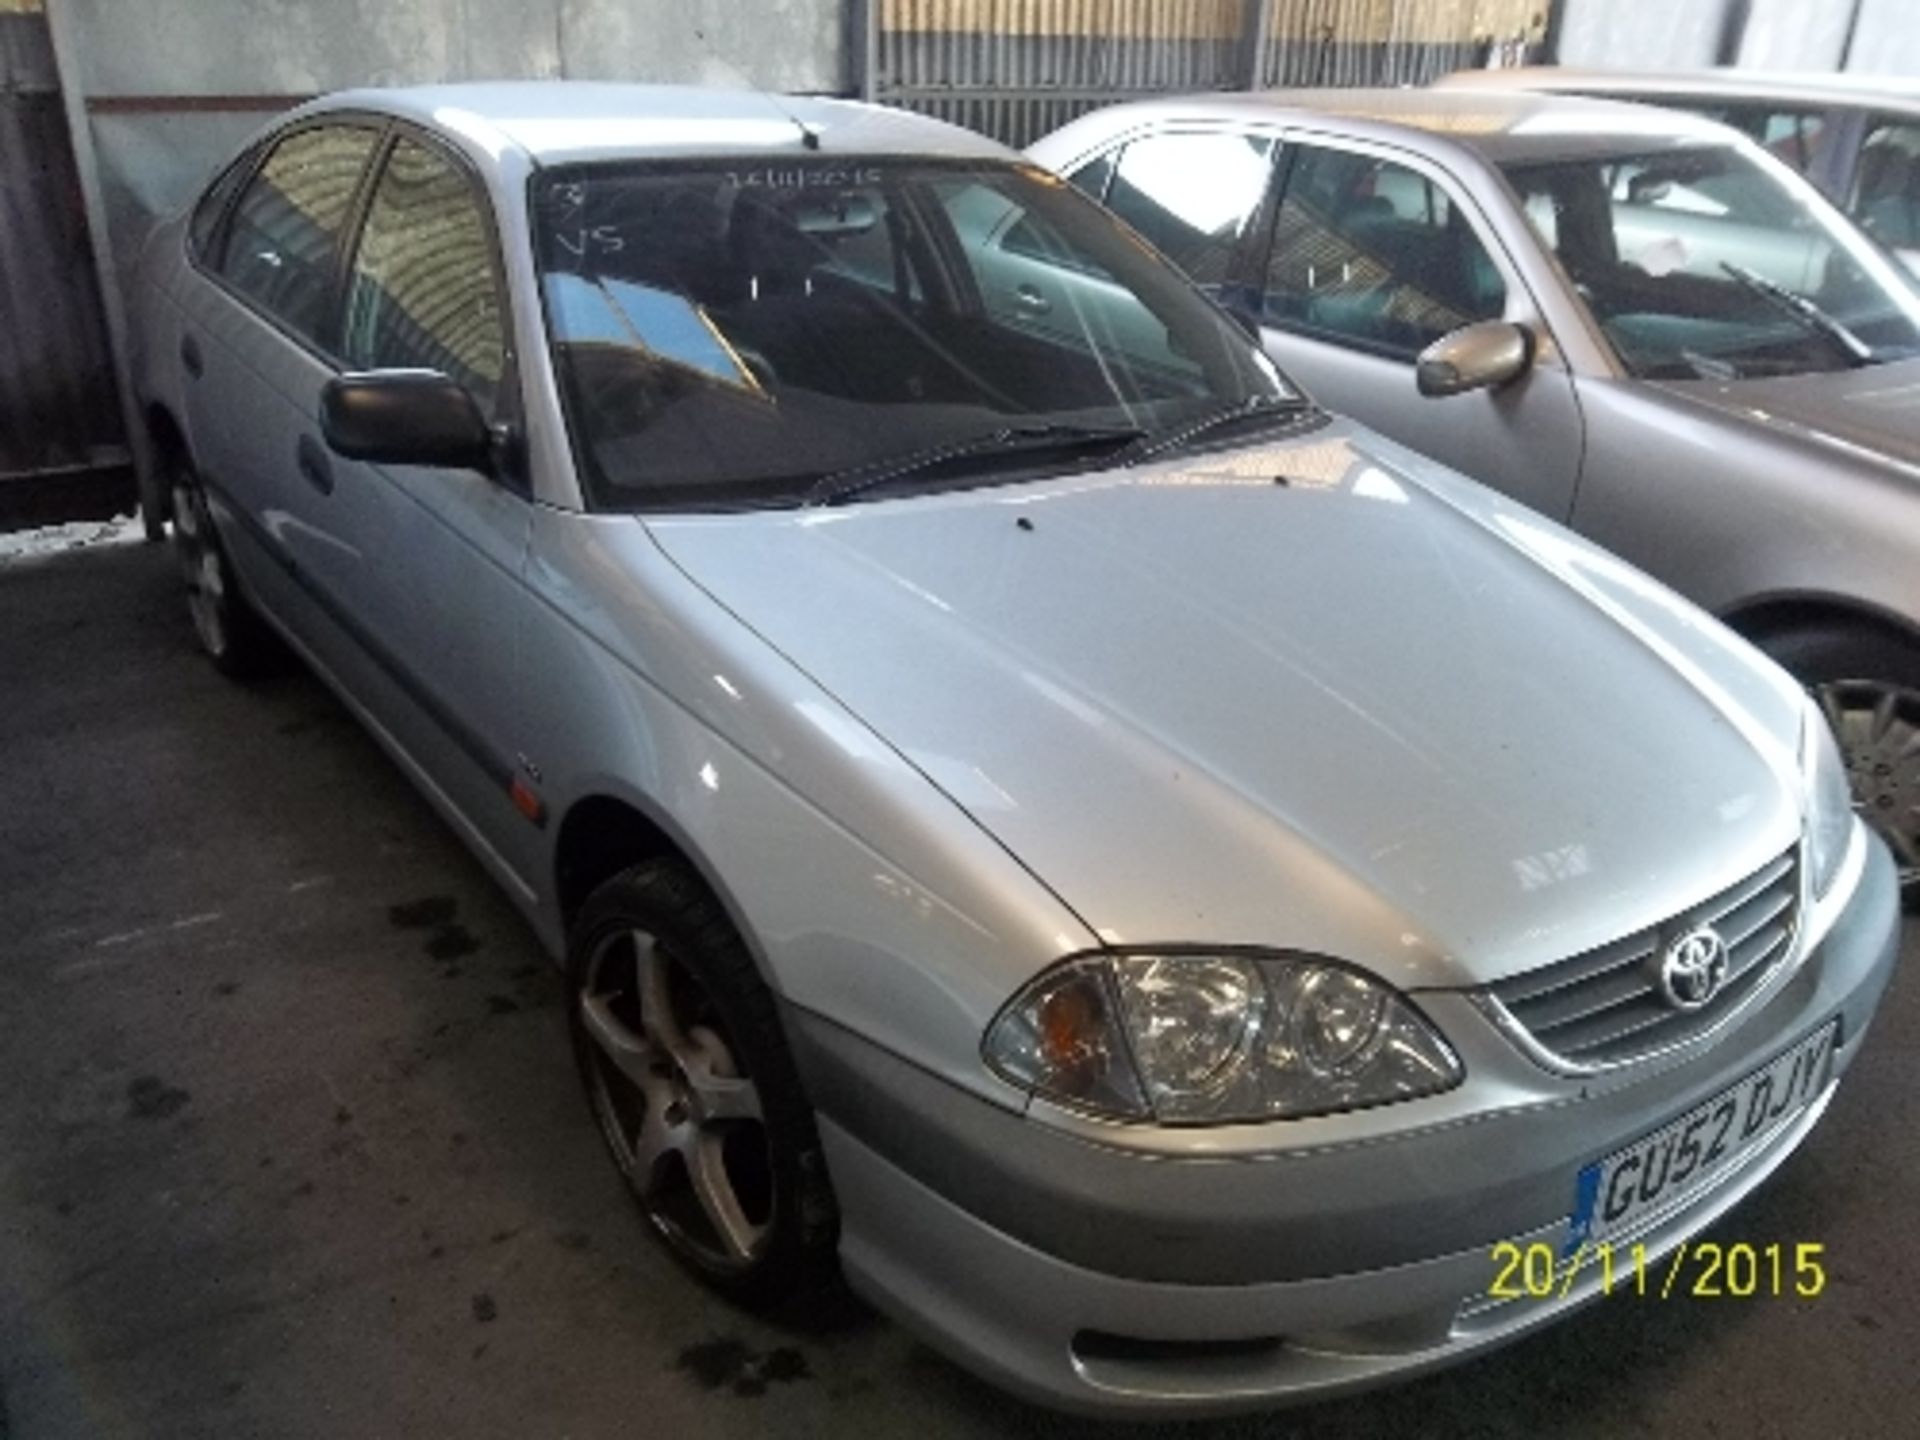 Toyota Avensis Vermont -GU52 DJY Date of registration: 30.09.2002 1794cc, petrol, manual, silver - Image 2 of 4